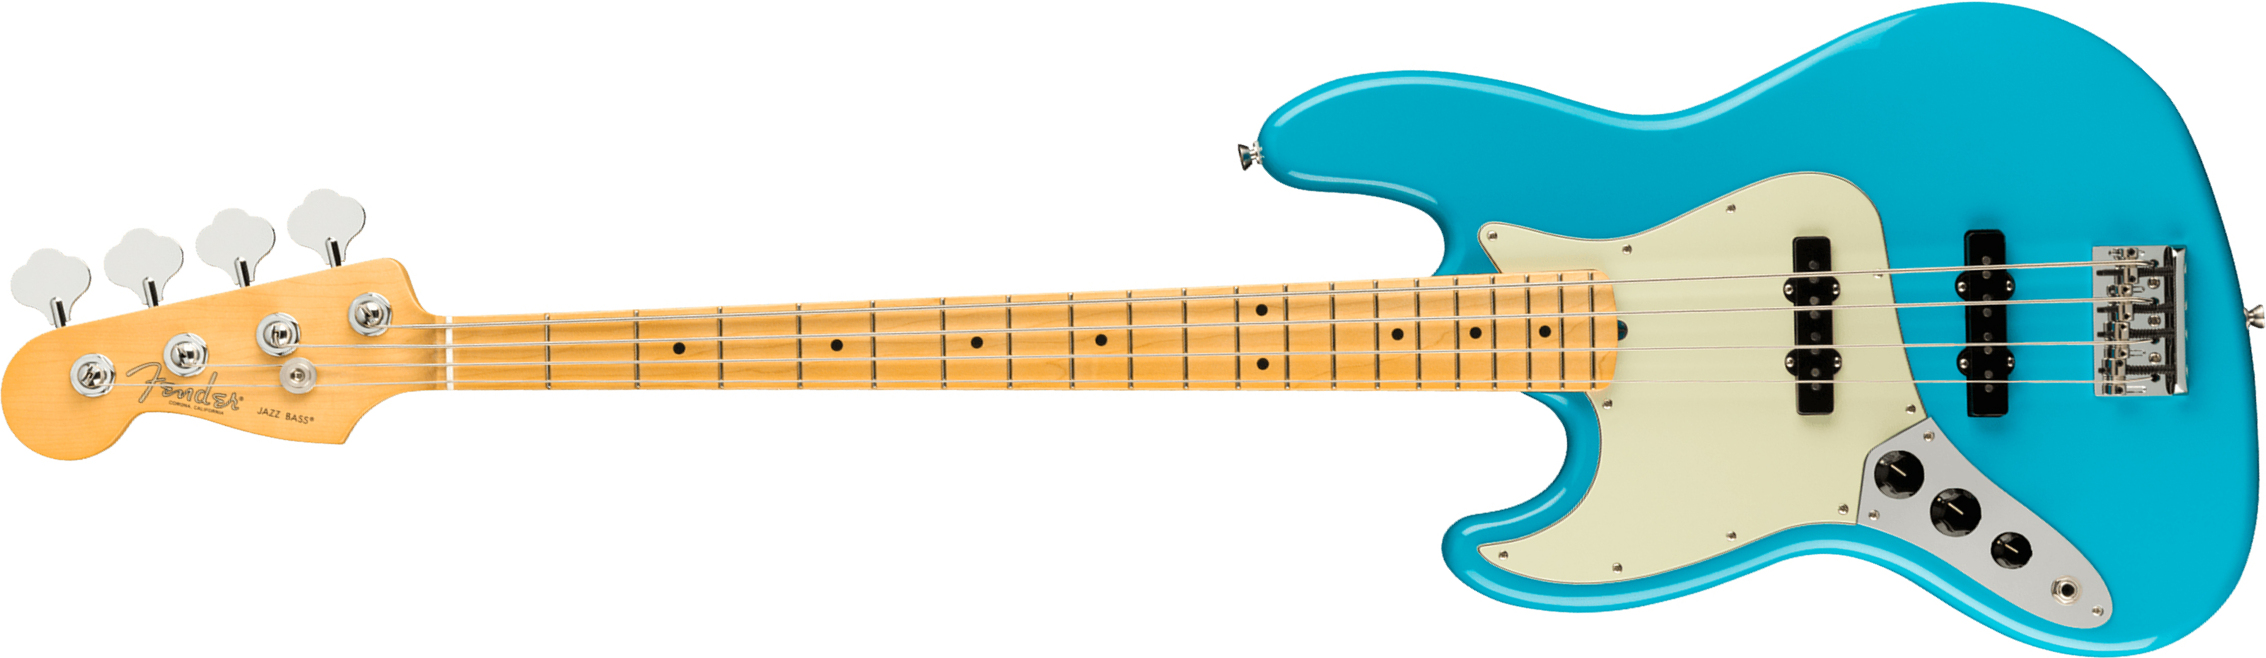 Fender Jazz Bass American Professional Ii Lh Gaucher Usa Mn - Miami Blue - Solid body electric bass - Main picture